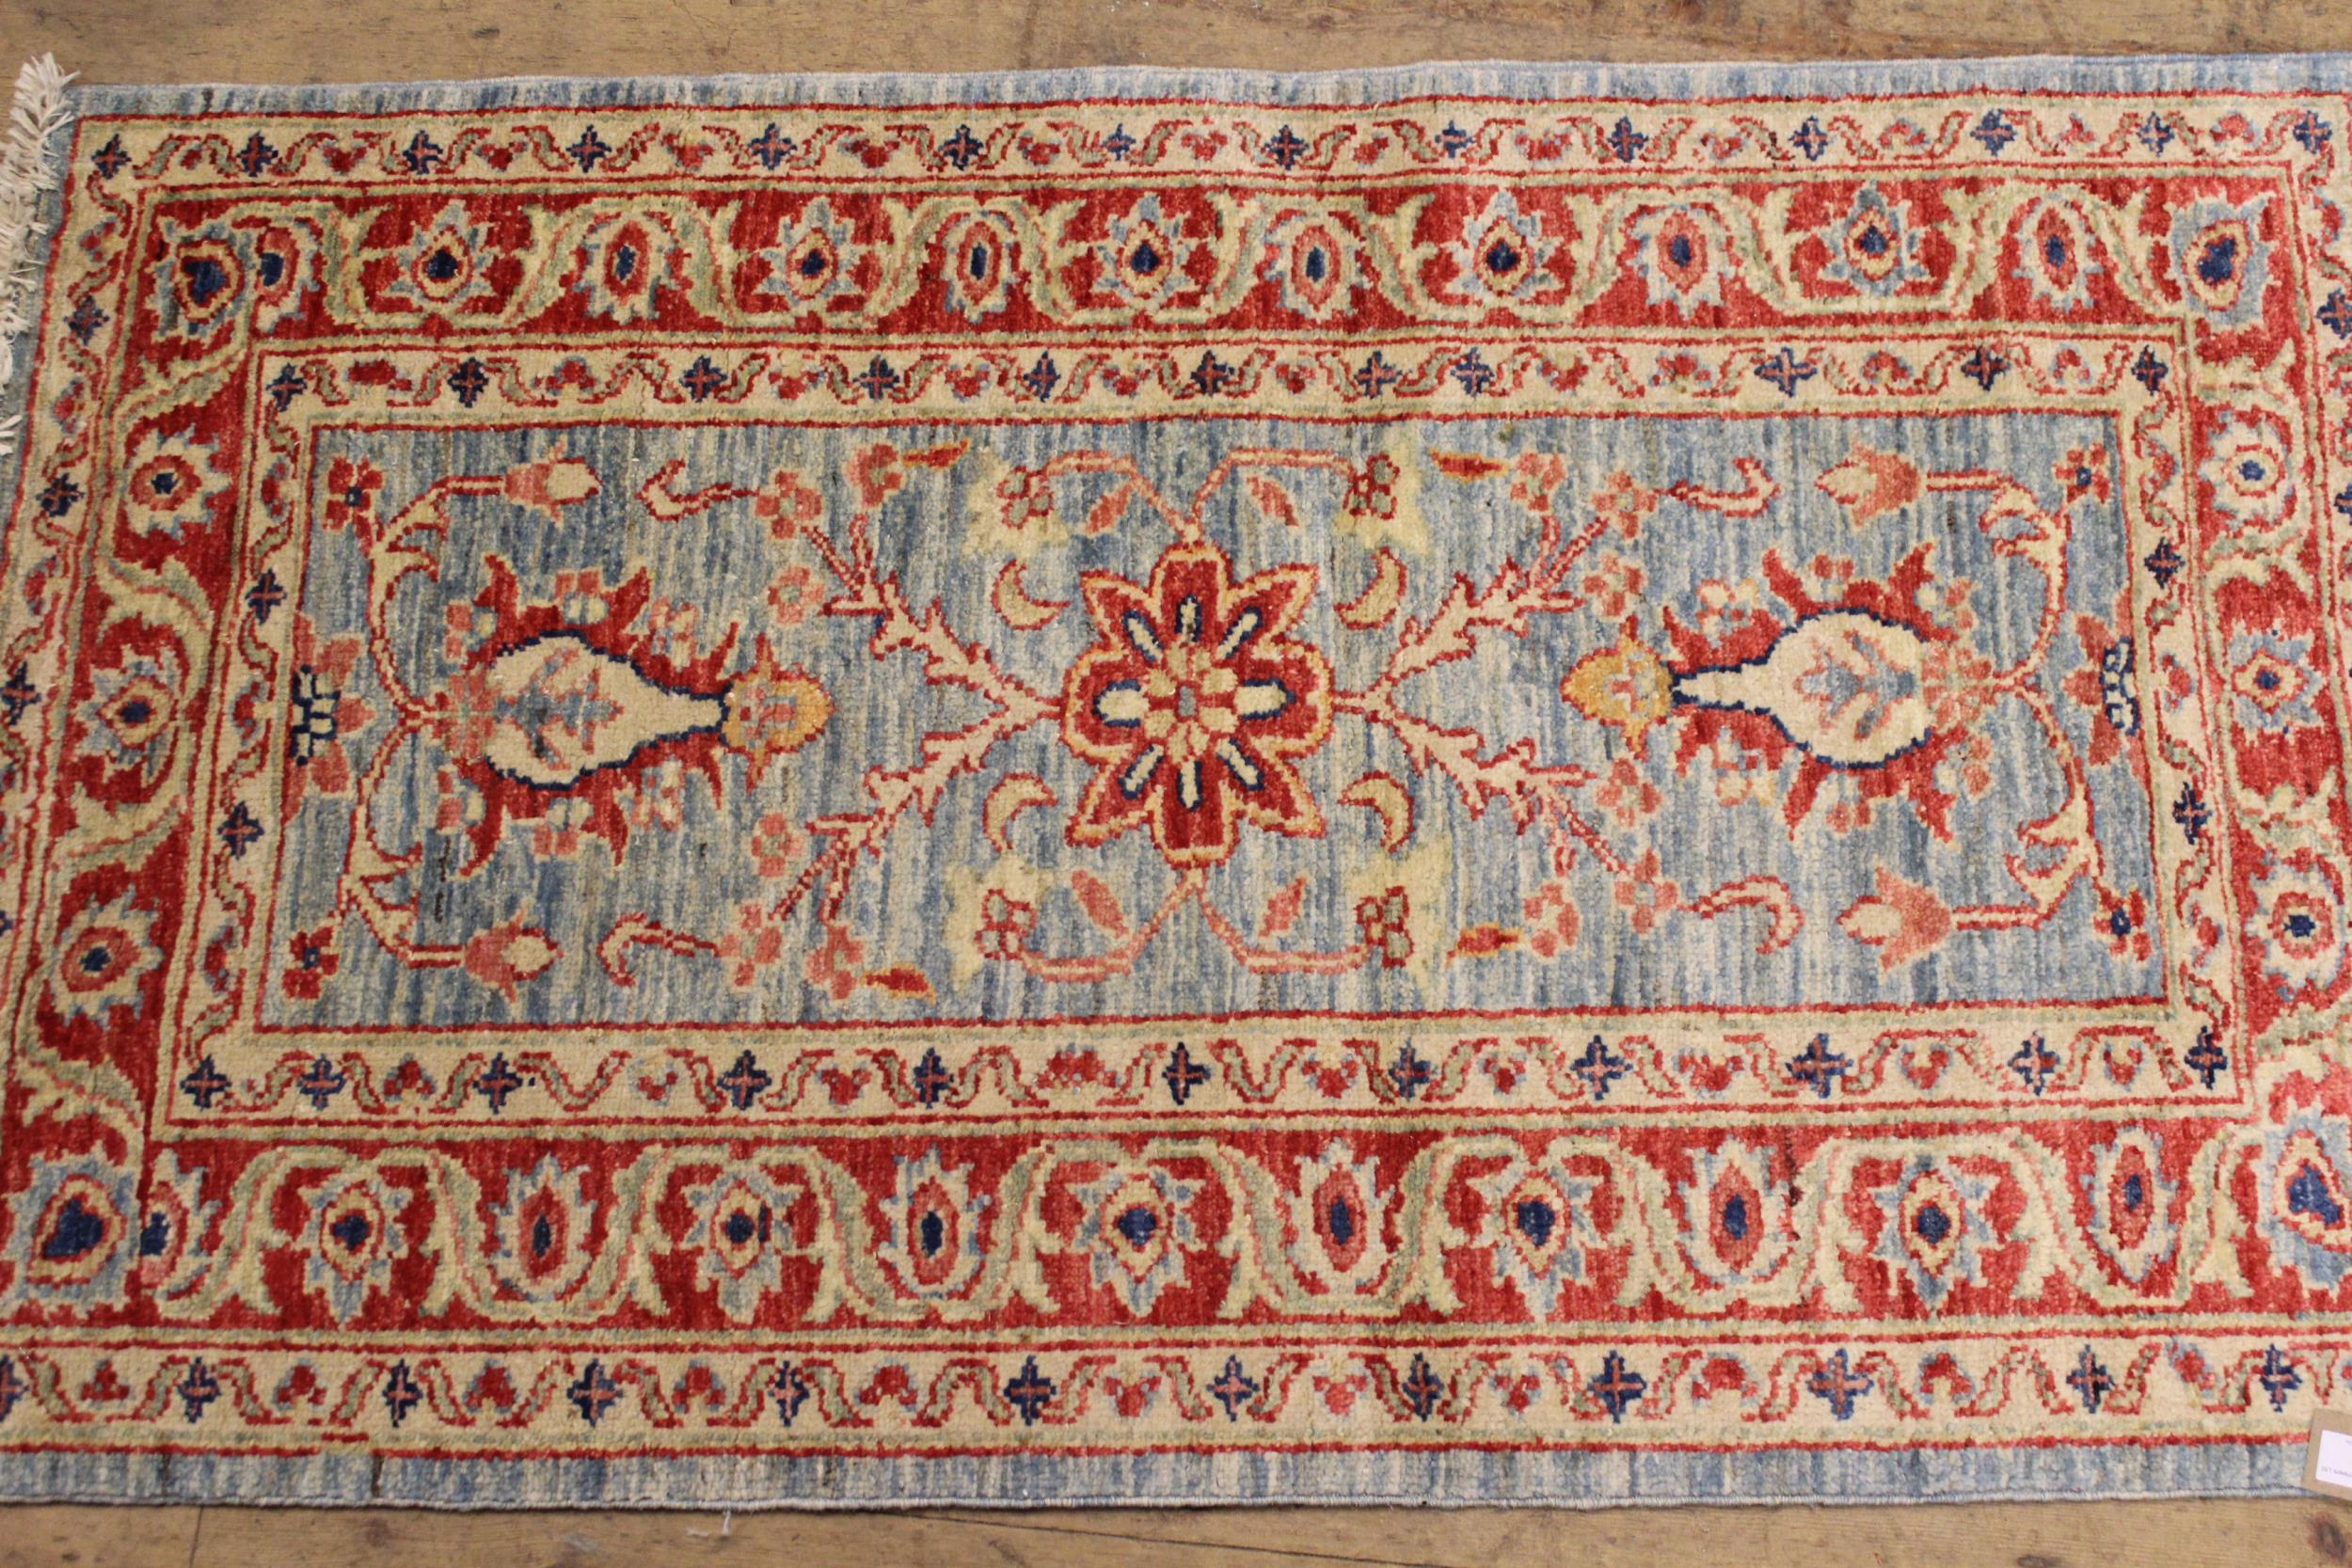 Pair of Indo / Persian rugs with floral design on blue ground, each 117 x 70cm - Image 2 of 2